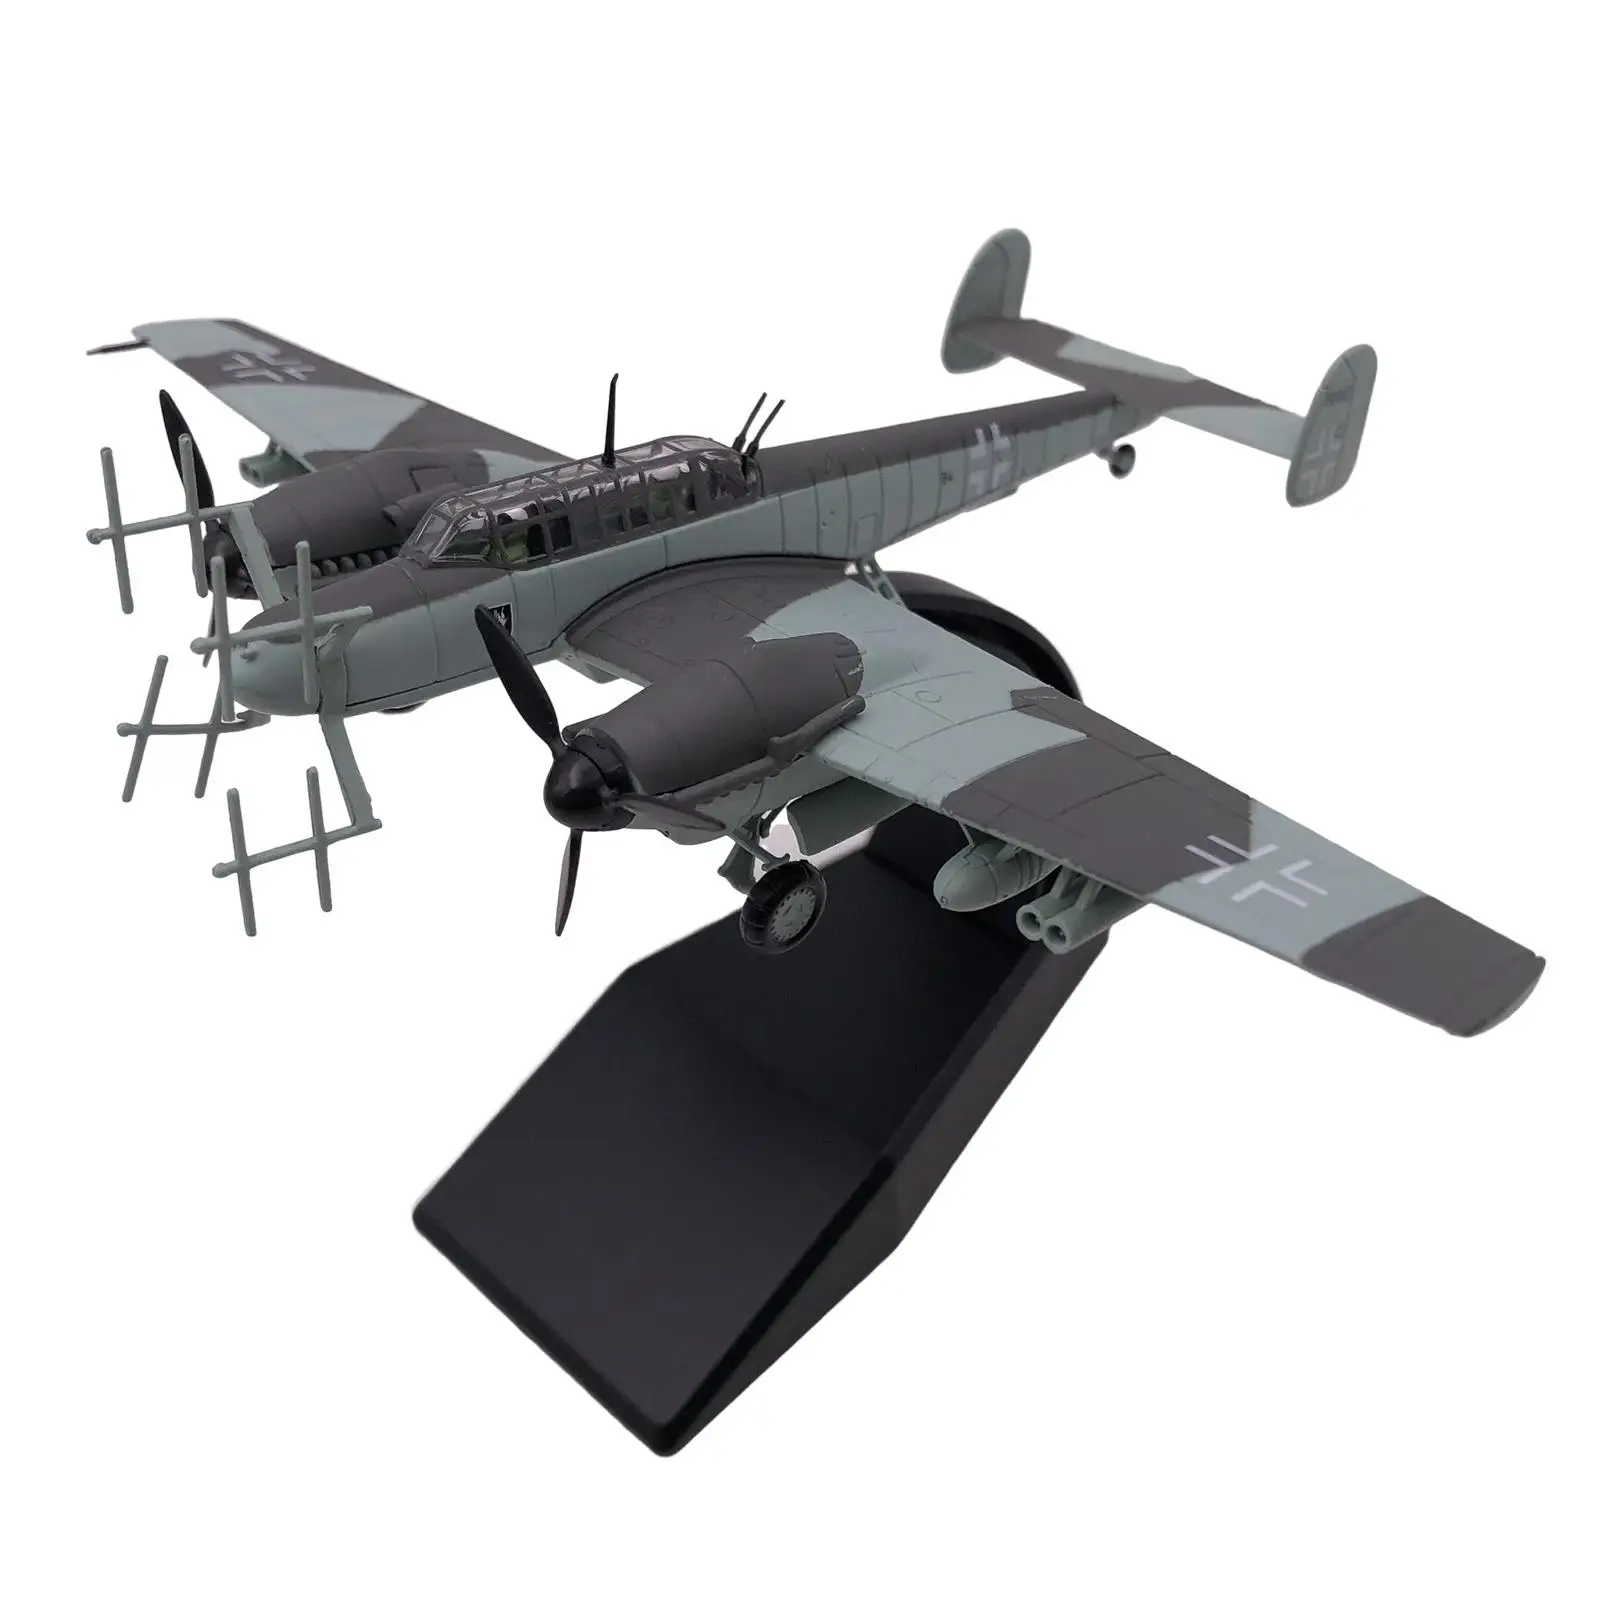 1/100 Scale BF-110 Fighter Model Toy with Stand Display Model Home Accessory